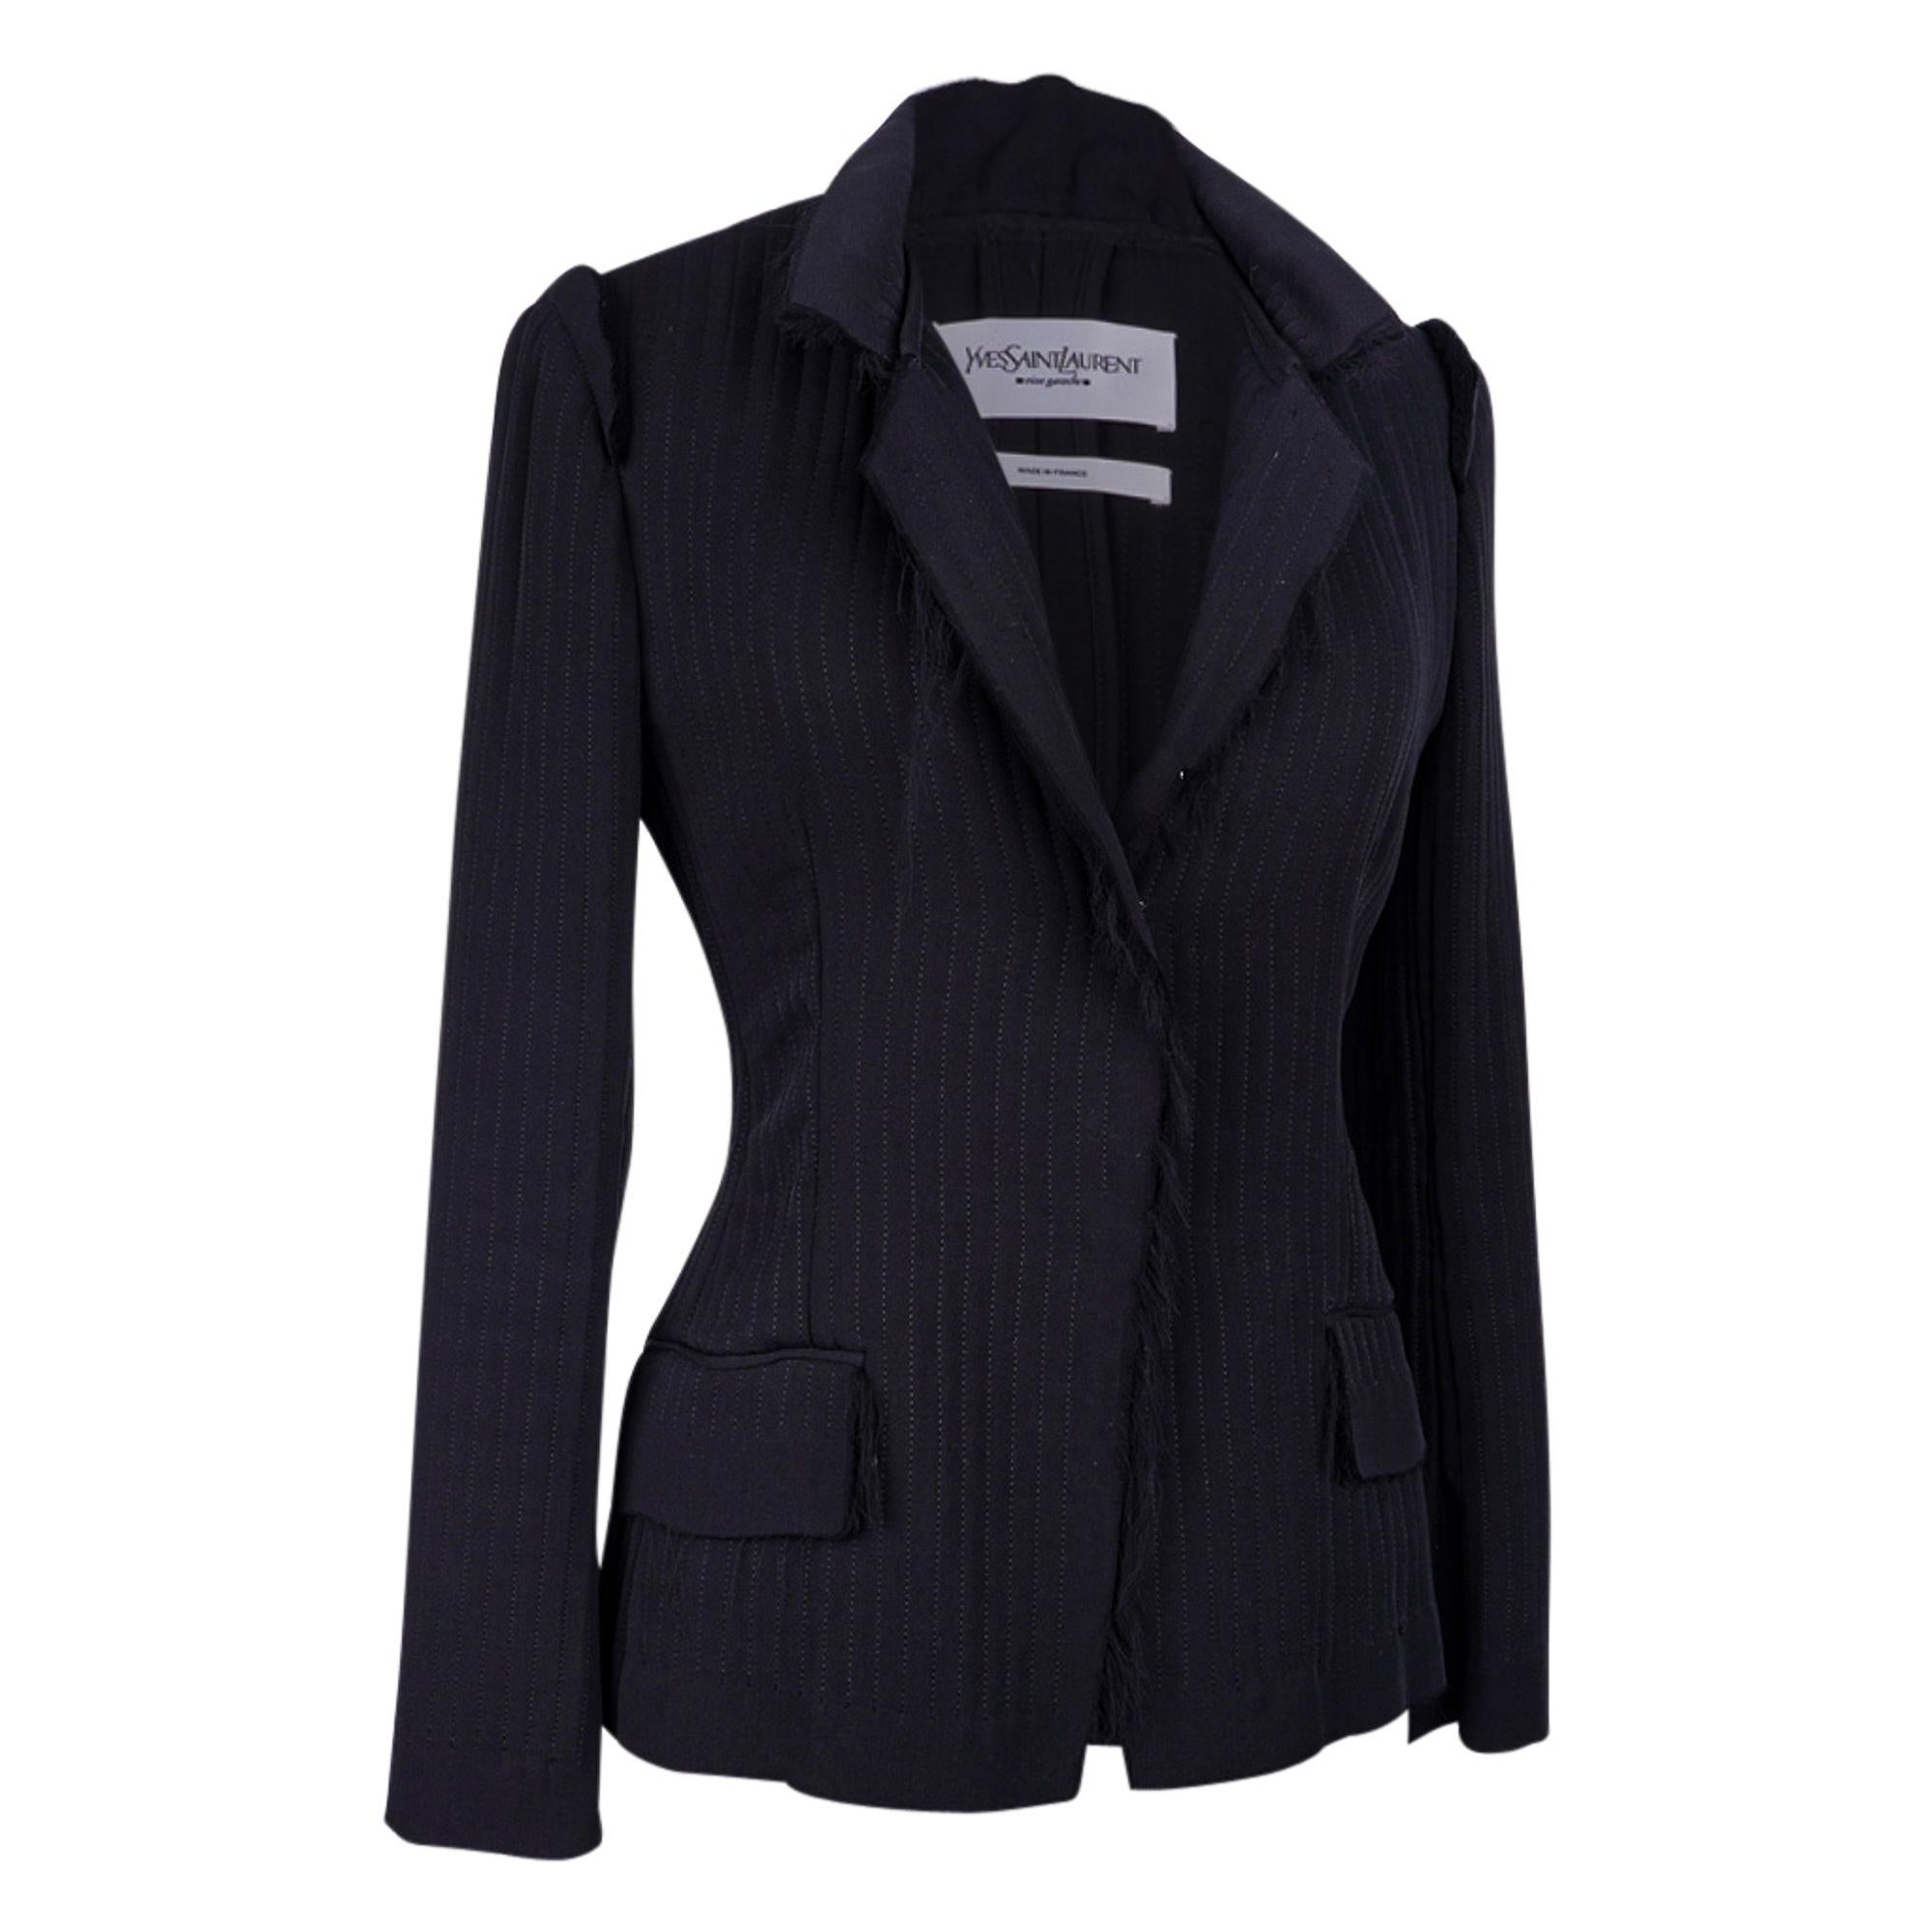 Yves Saint Laurent Jacket Exquisite Tom Ford Creation in Layers 36 at ...